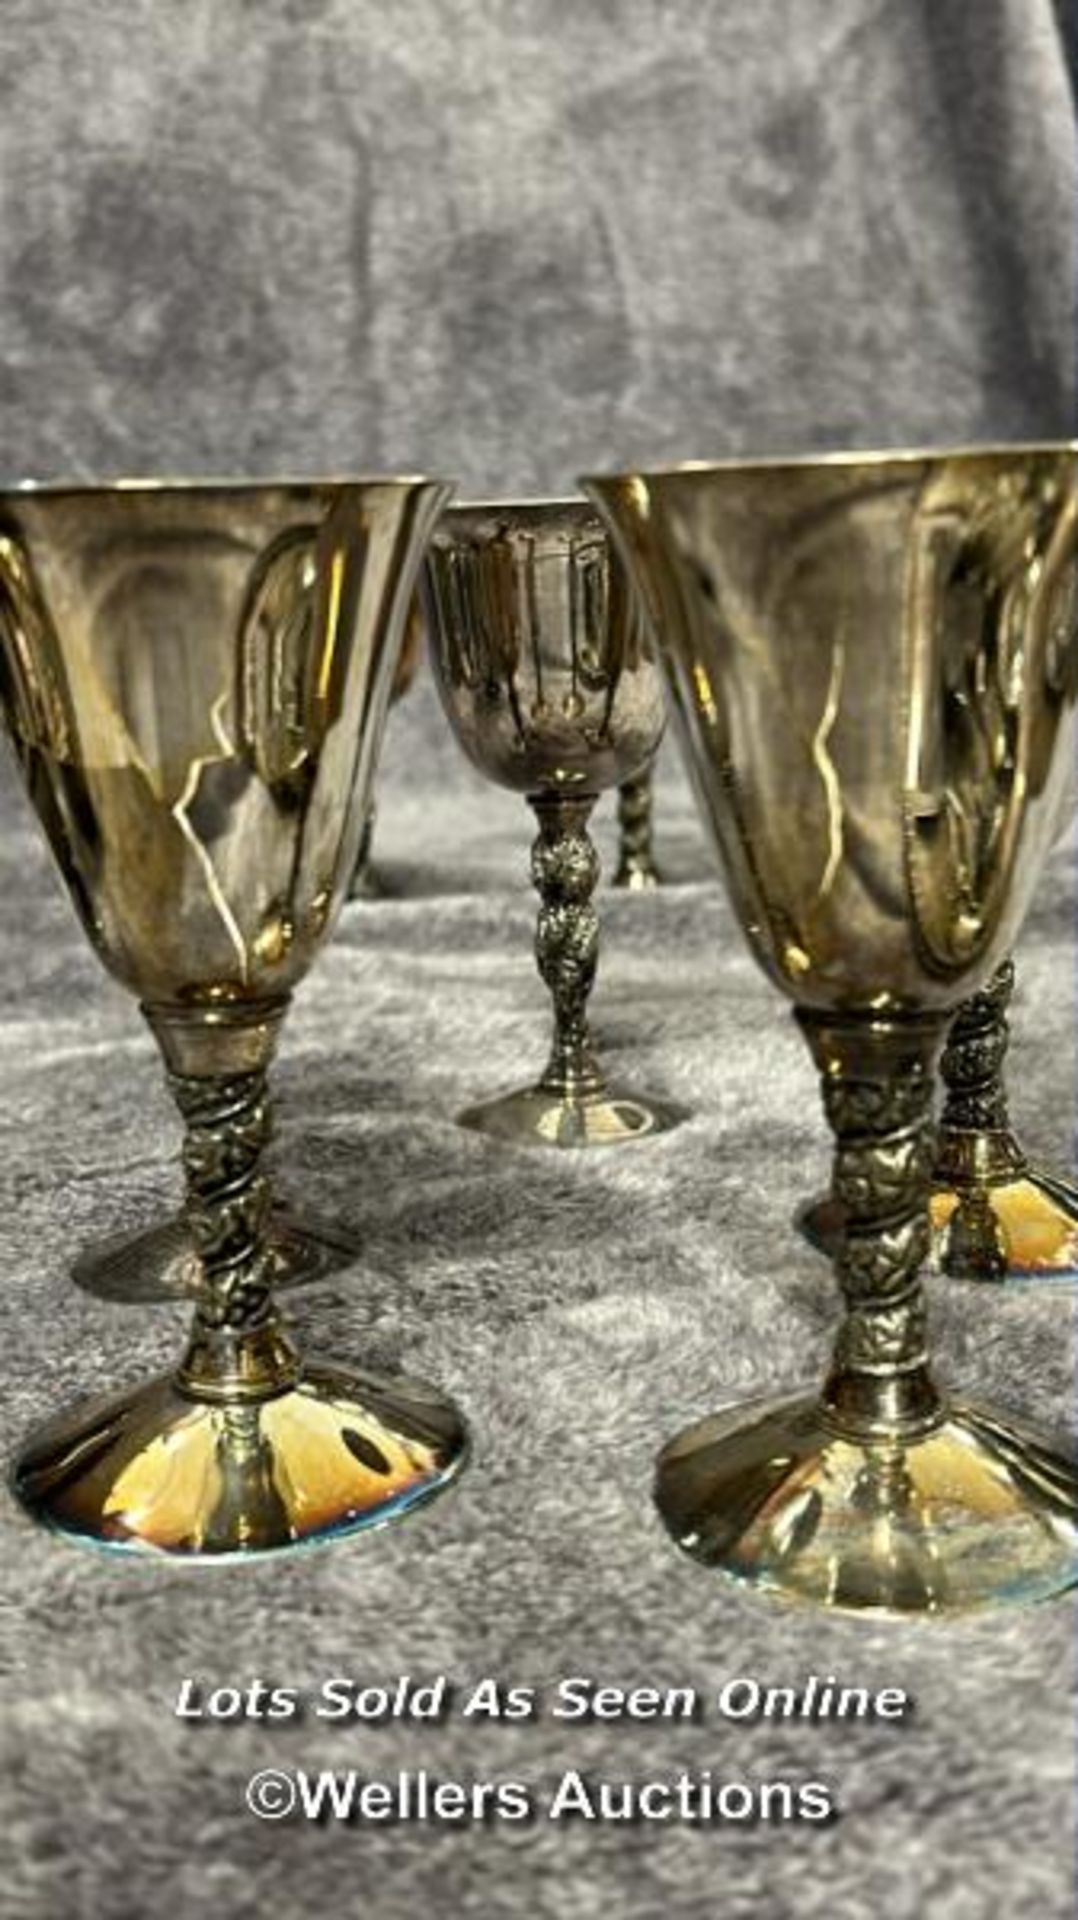 A large collection of antique metal plated items including a three armed candelabra, goblets, - Image 5 of 17